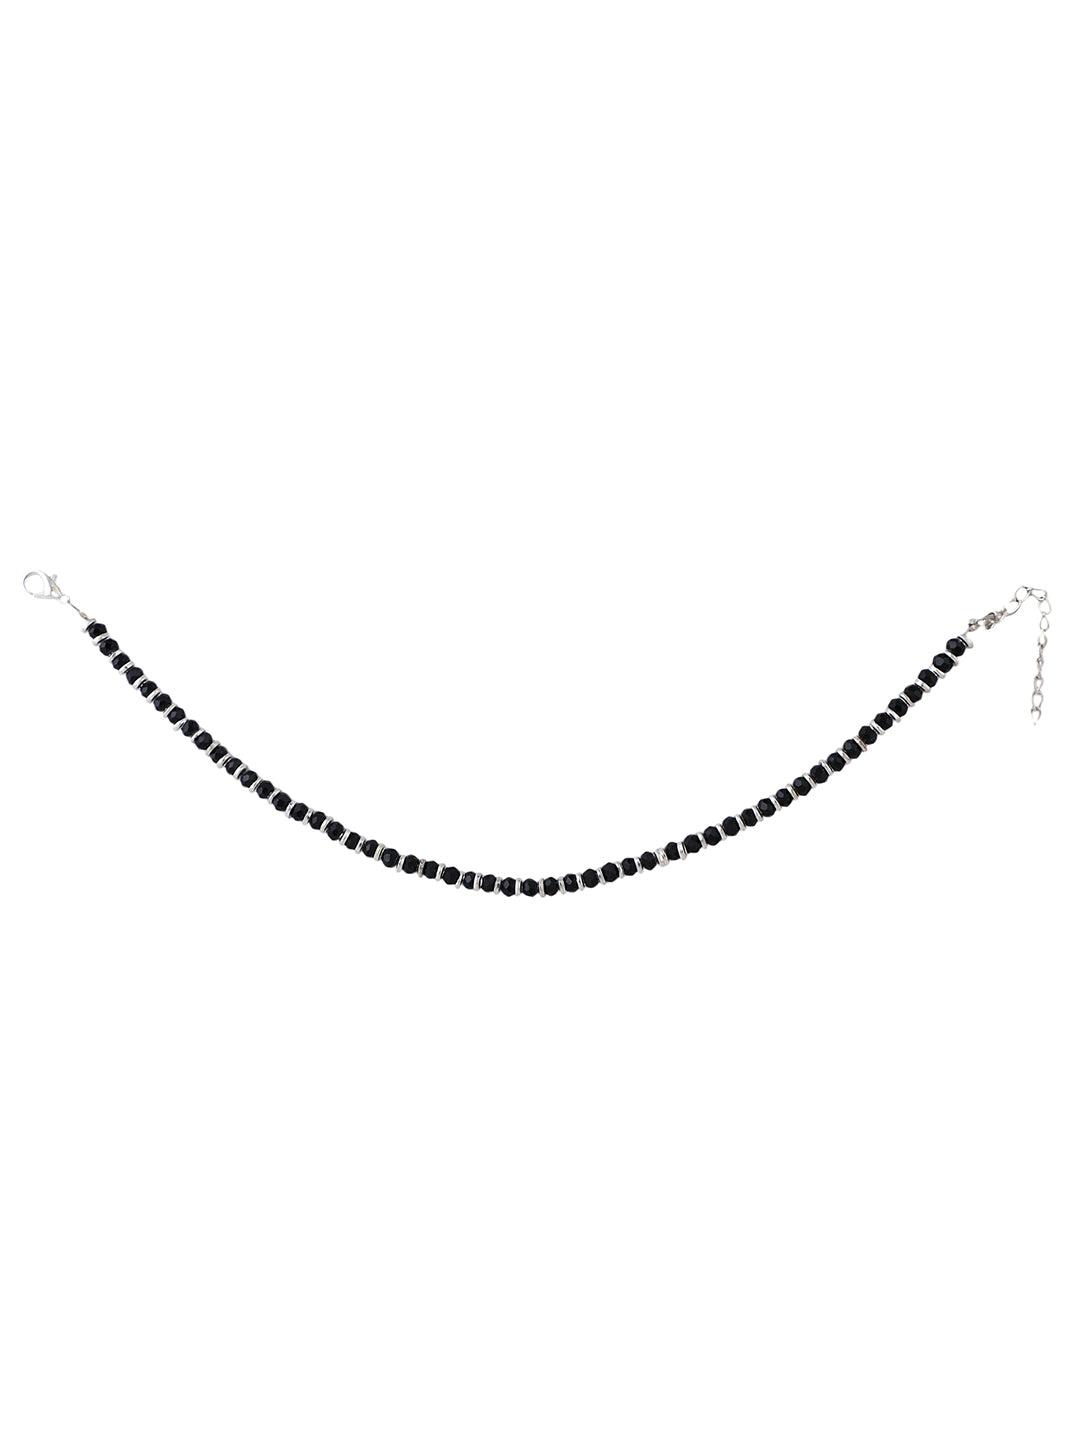 Women's Set Of 2 Classy Silver And Black Western Look Sleek Beads Anklet/Payal - Anikas Creation